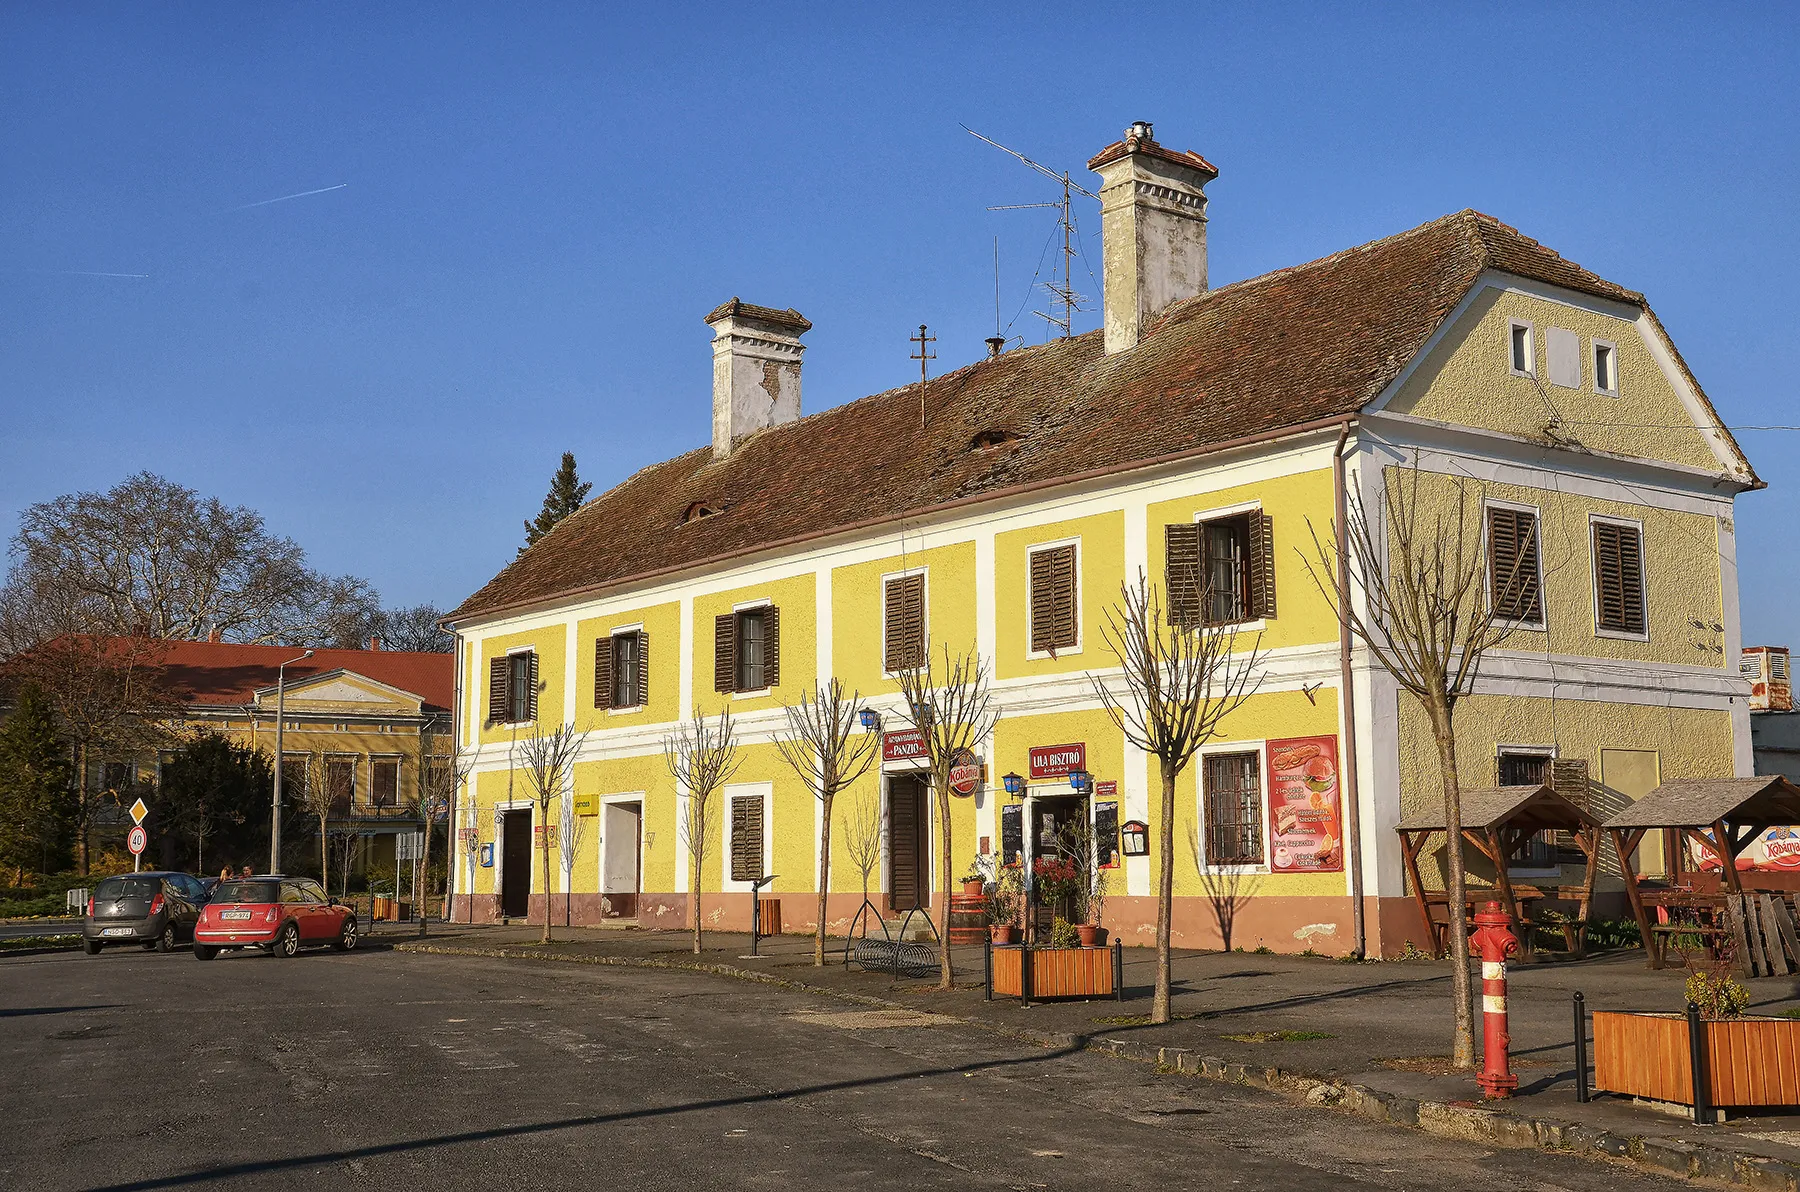 Photo showing: Letenye, Hungary, the Golden Sheep Inn, with the Szapáry-Andrássy Mansion in the background